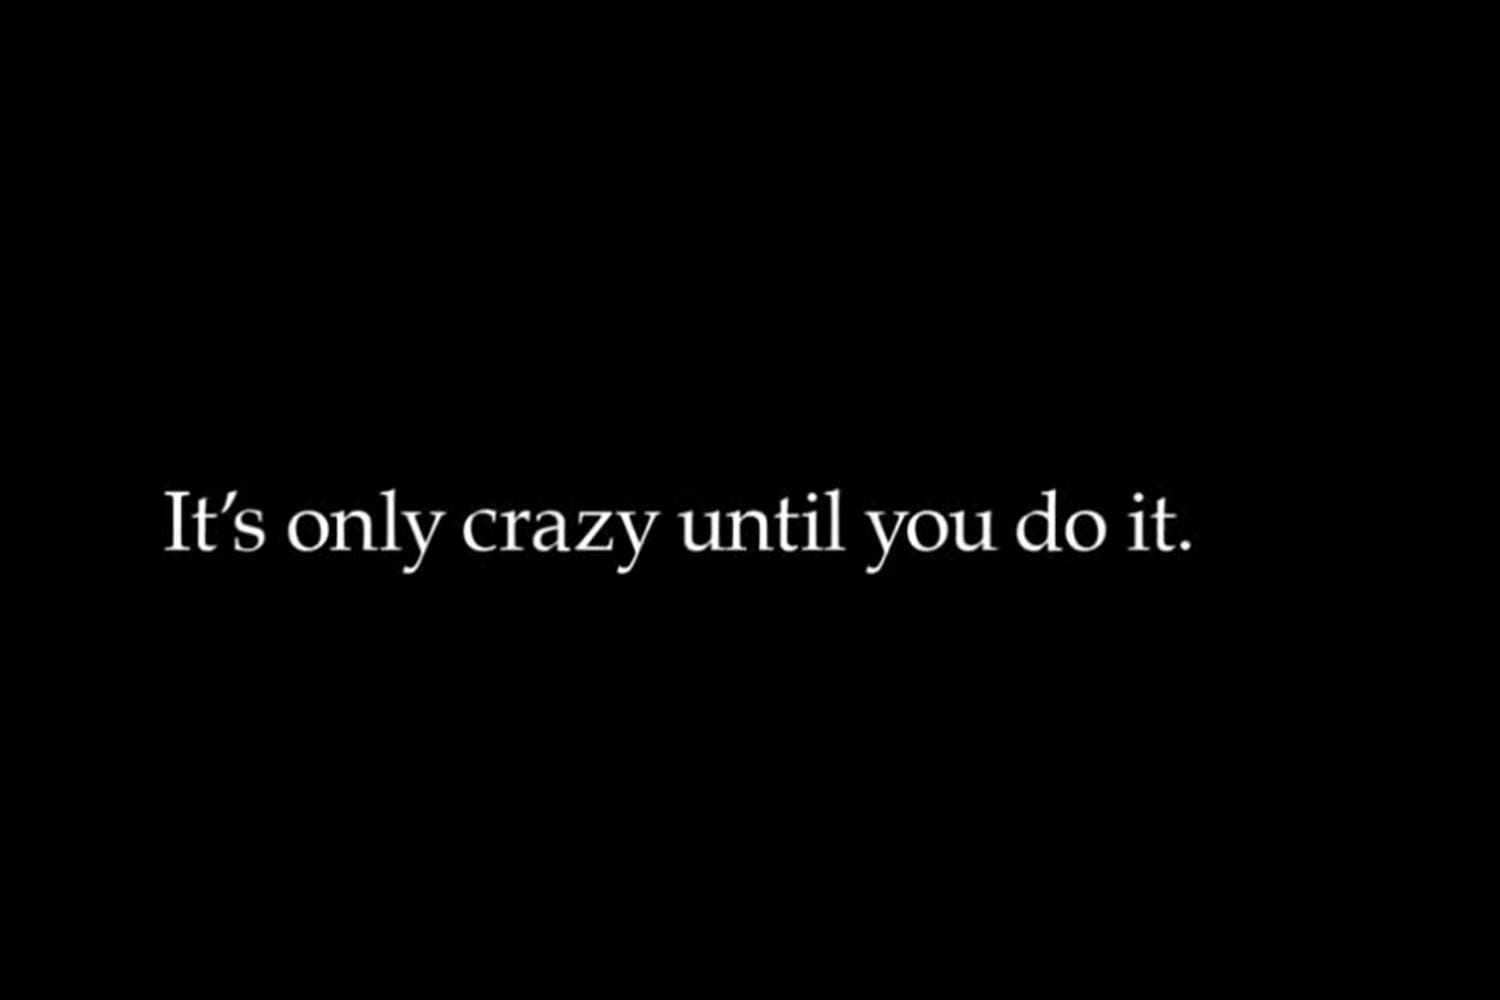 It's only crazy until you do it” | by 